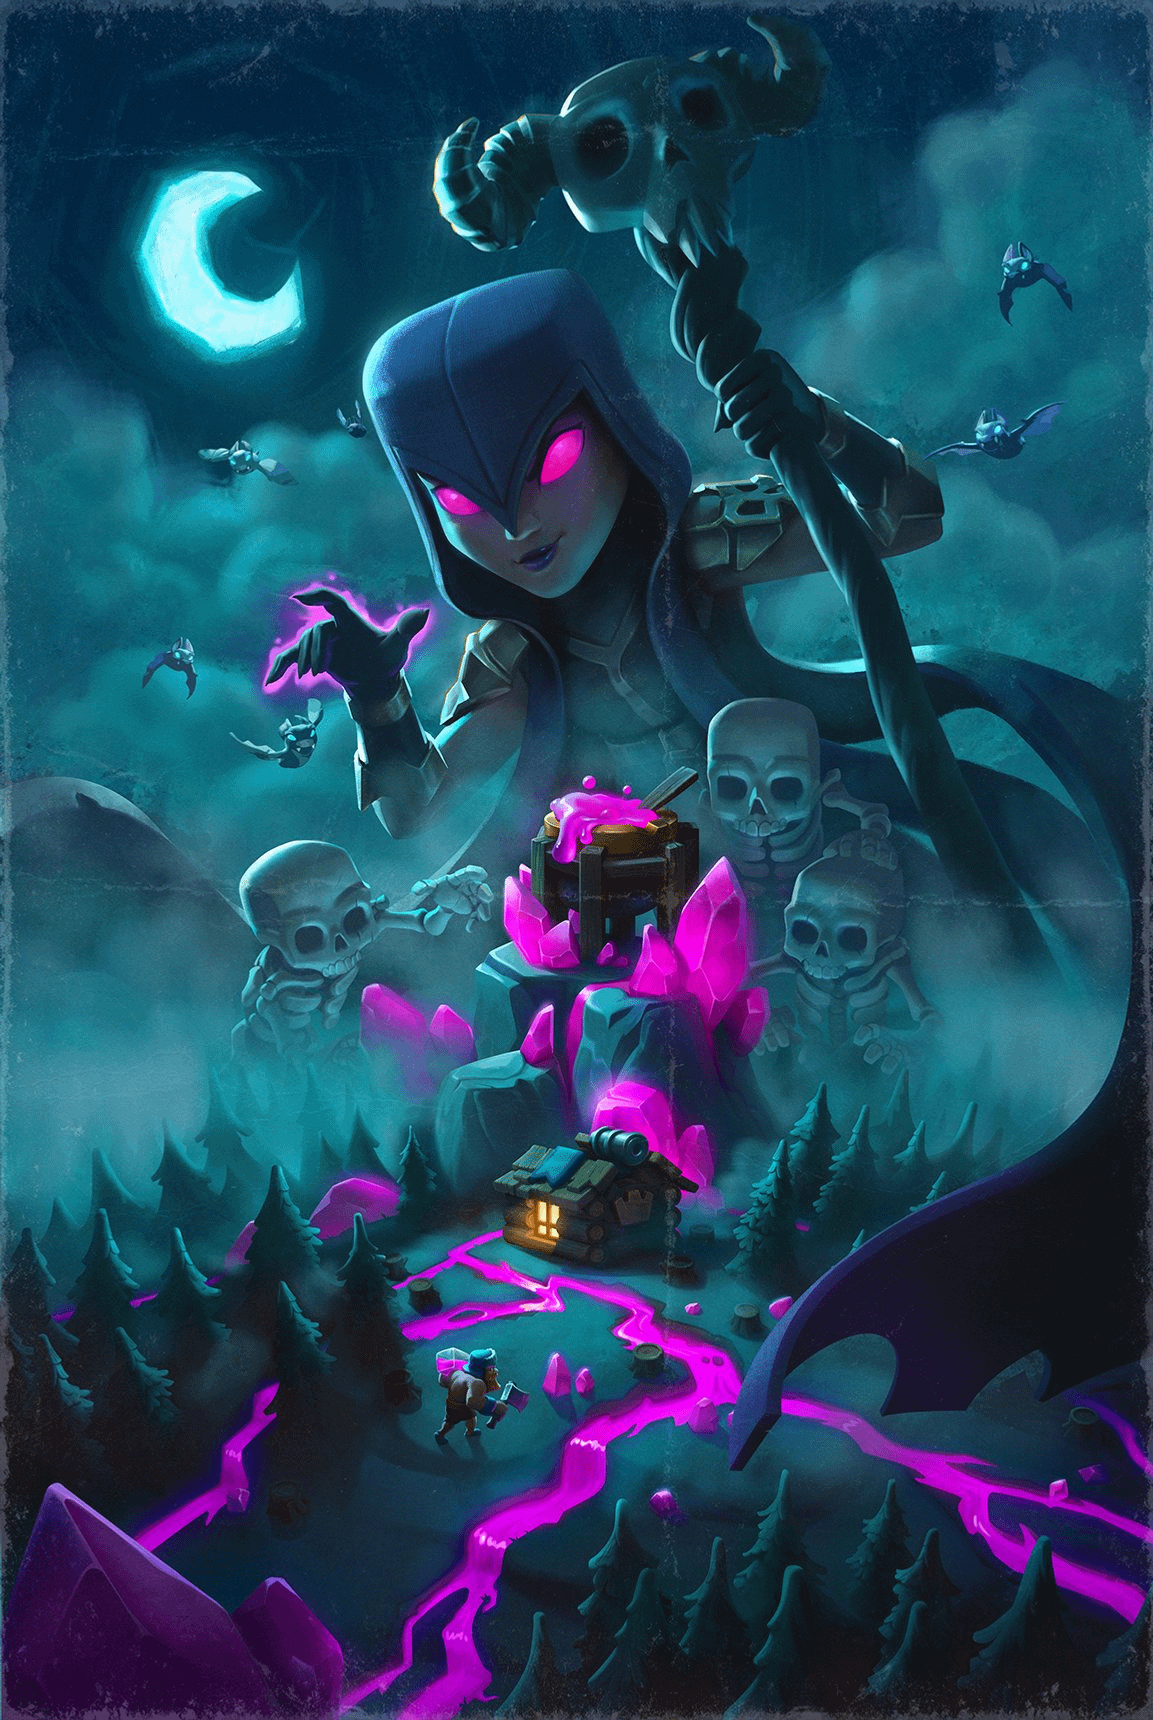 Clash Royale Loading Screen Video Game Art Night Skeleton Witch Bats Glowing Eyes Portrait Display V 1153x1720